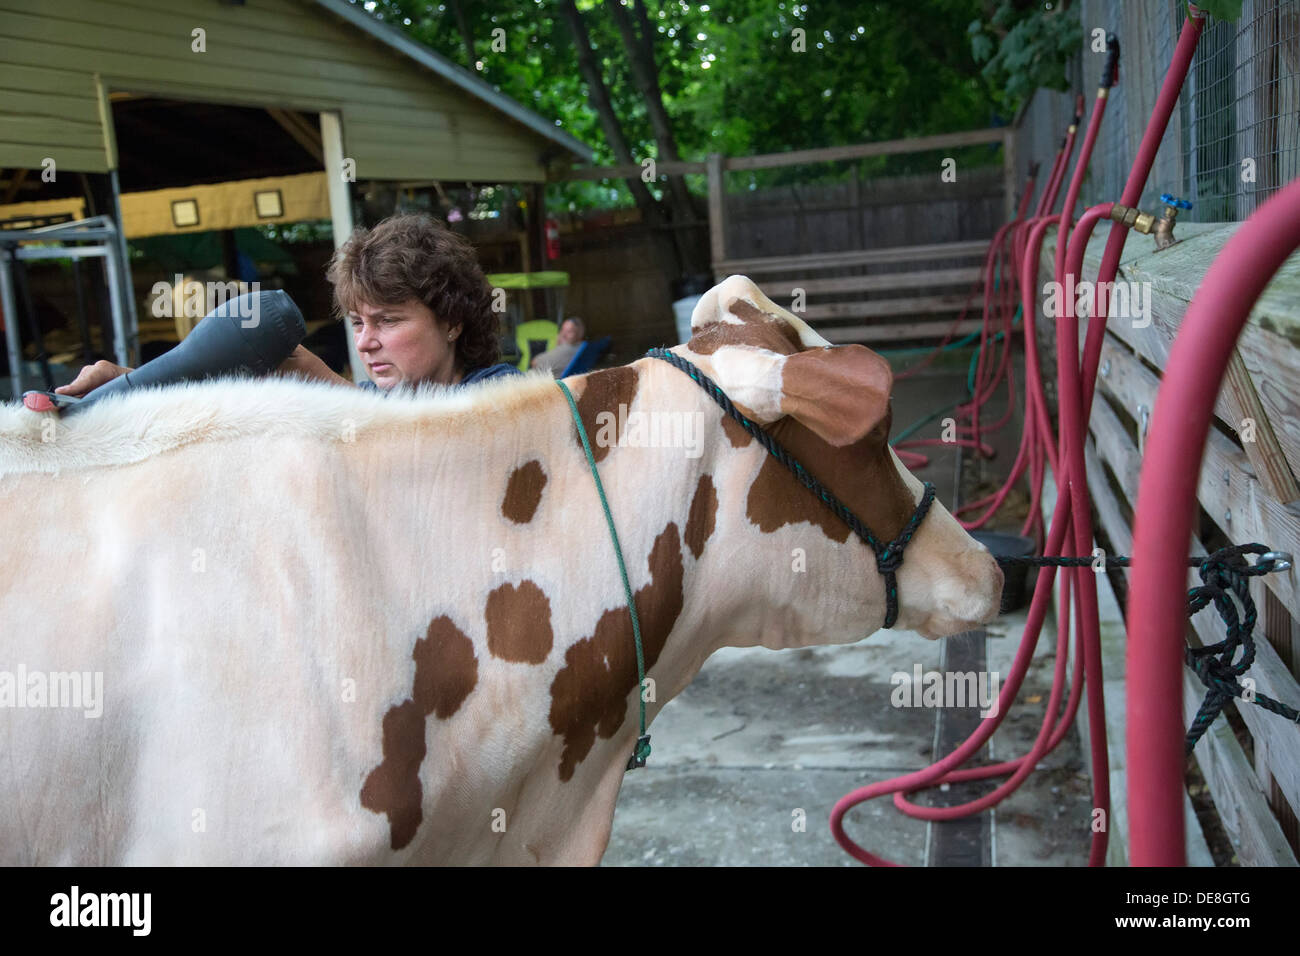 Chatham, New York - Rebecca Sears grooms a cow before showing it at the Columbia County Fair. Stock Photo